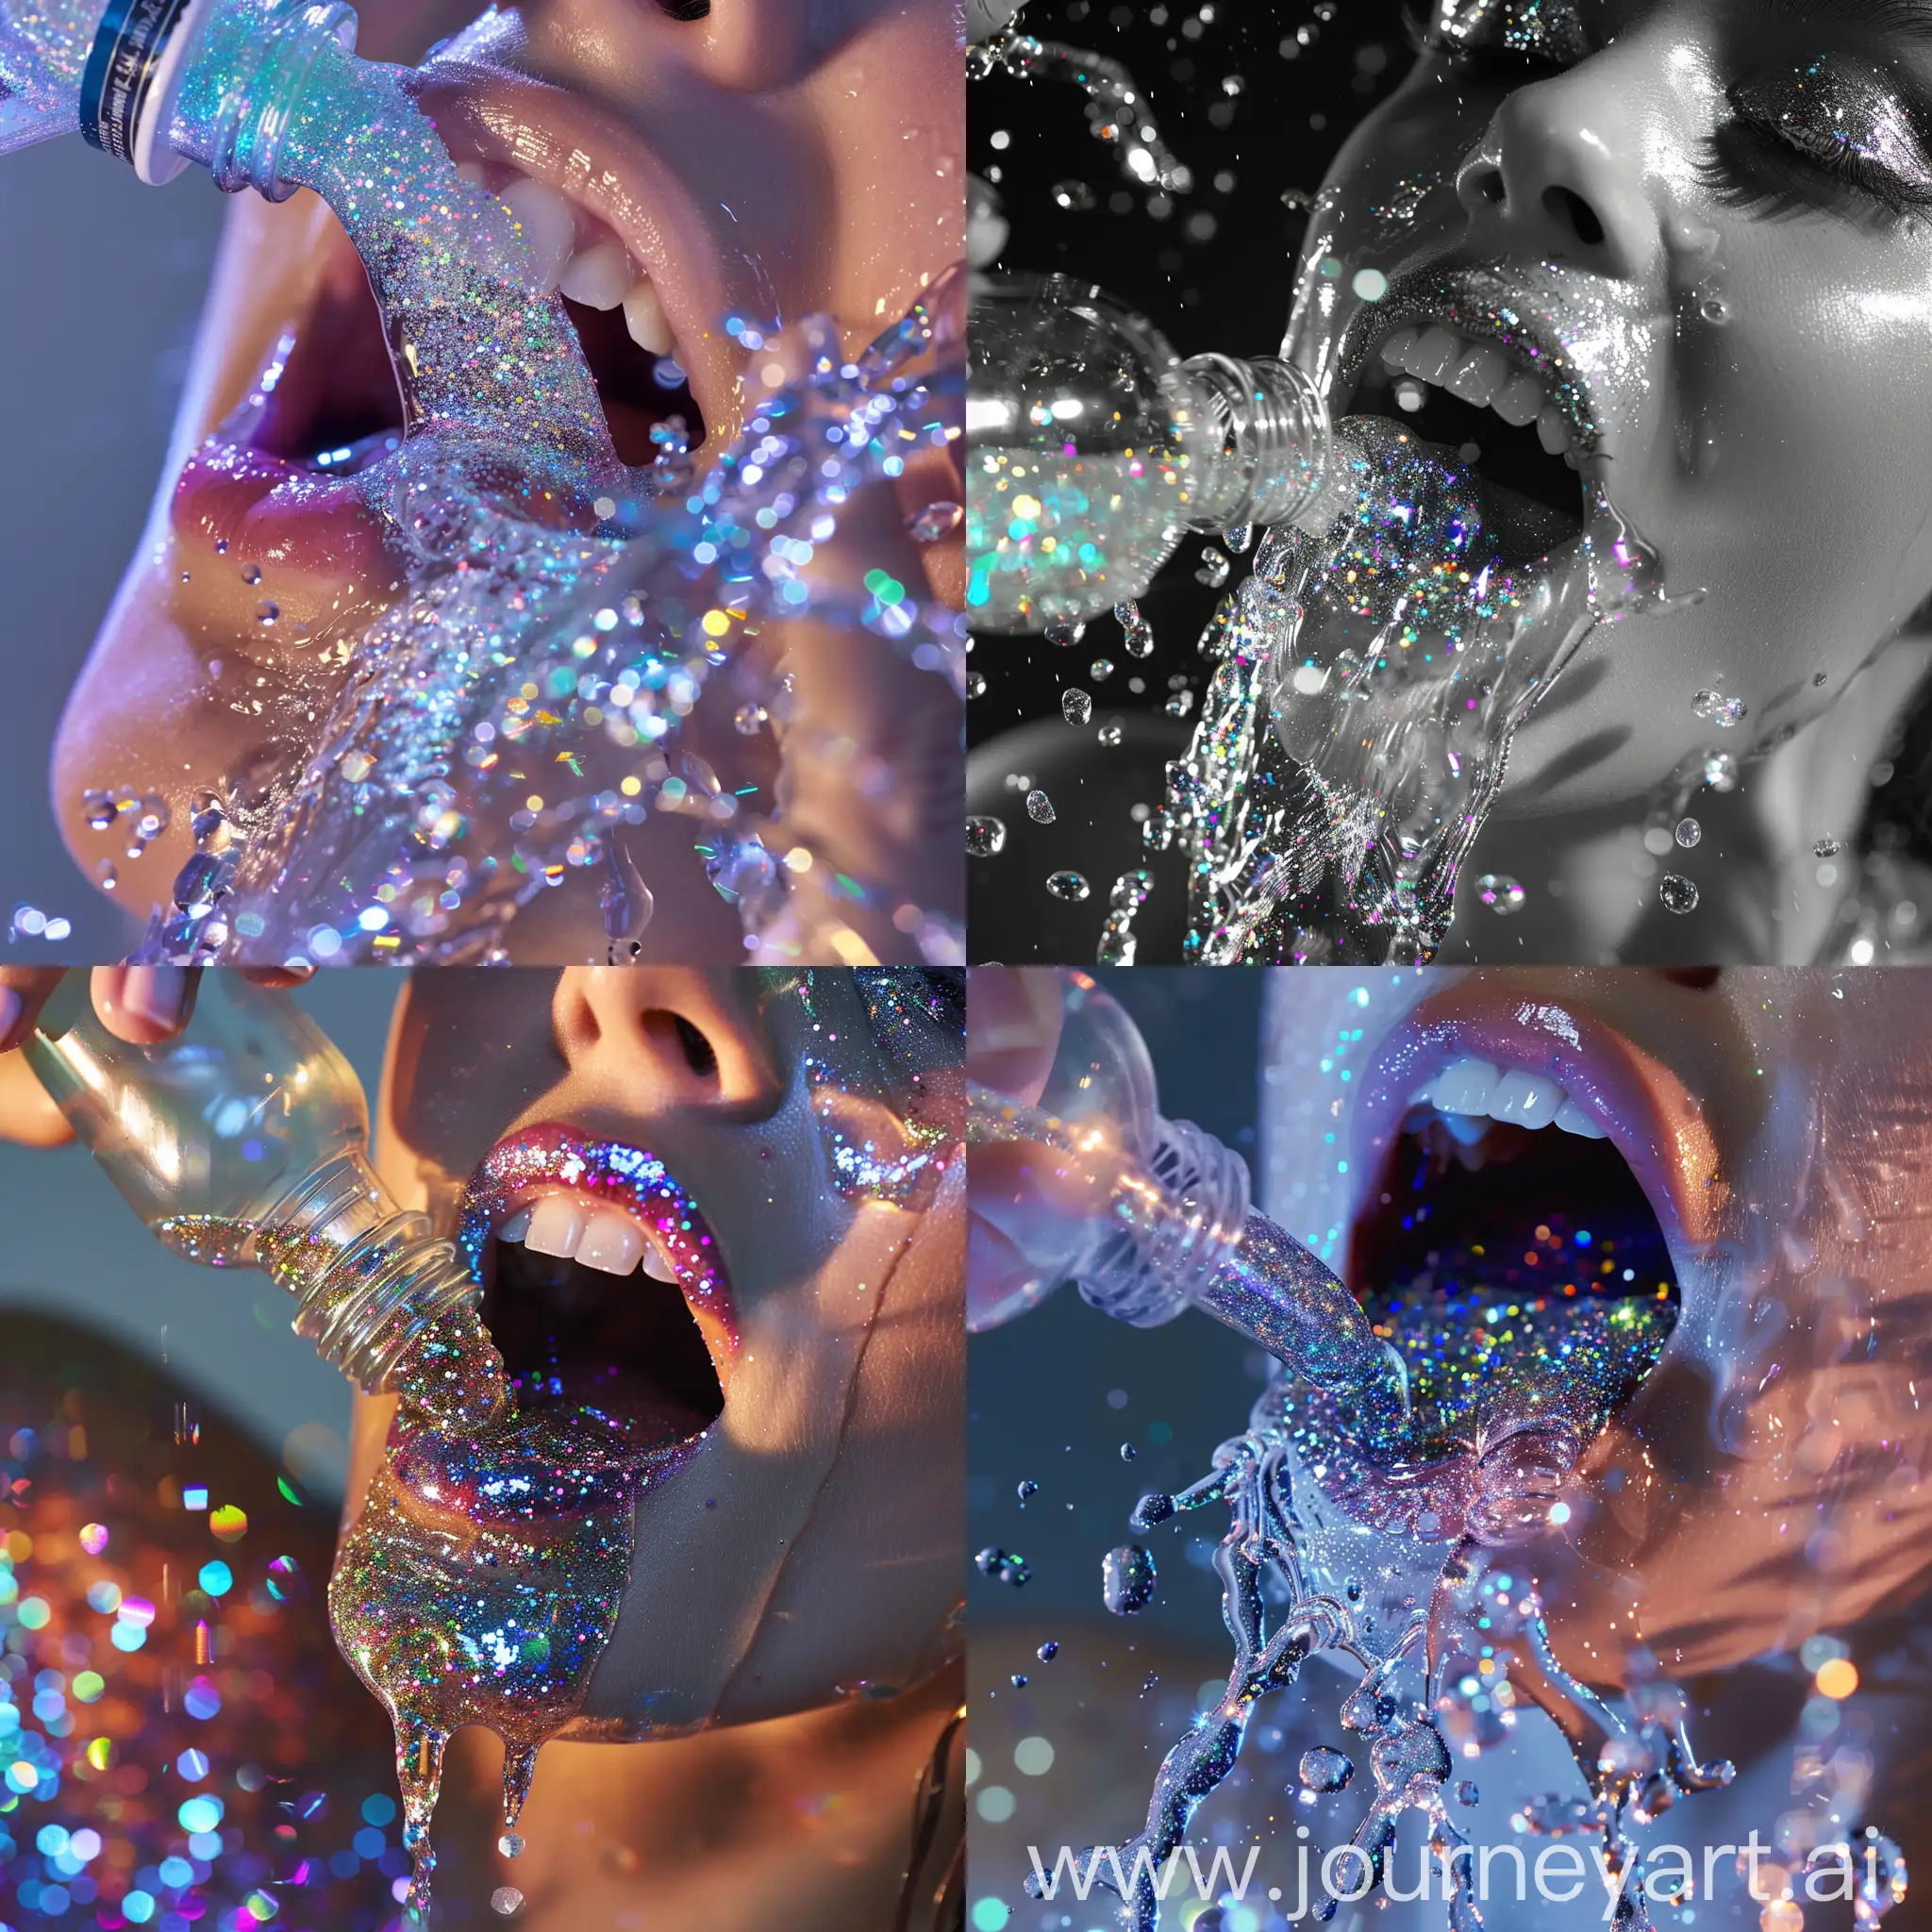 water with glitter spilling from bottle into woman's mouth